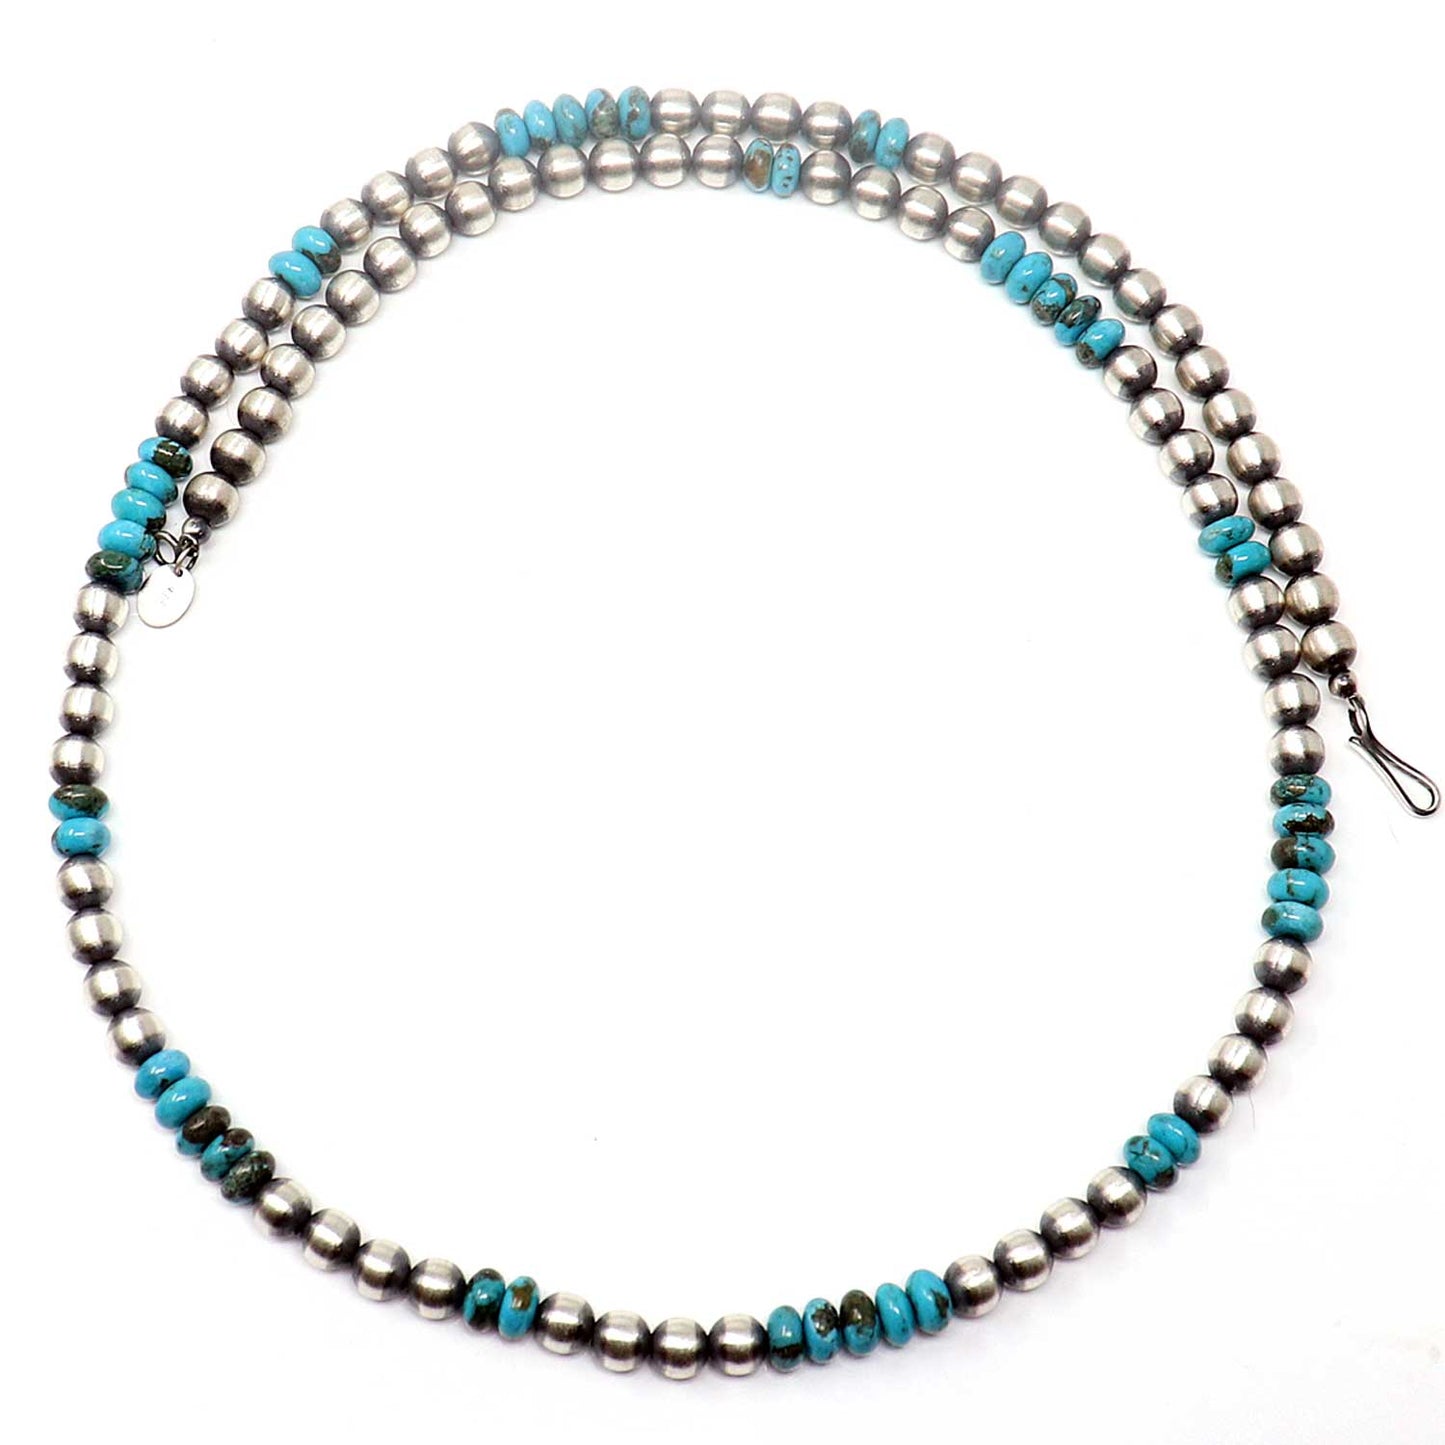 24" 6 mm Sterling Silver Pearls With Turquoise Accents